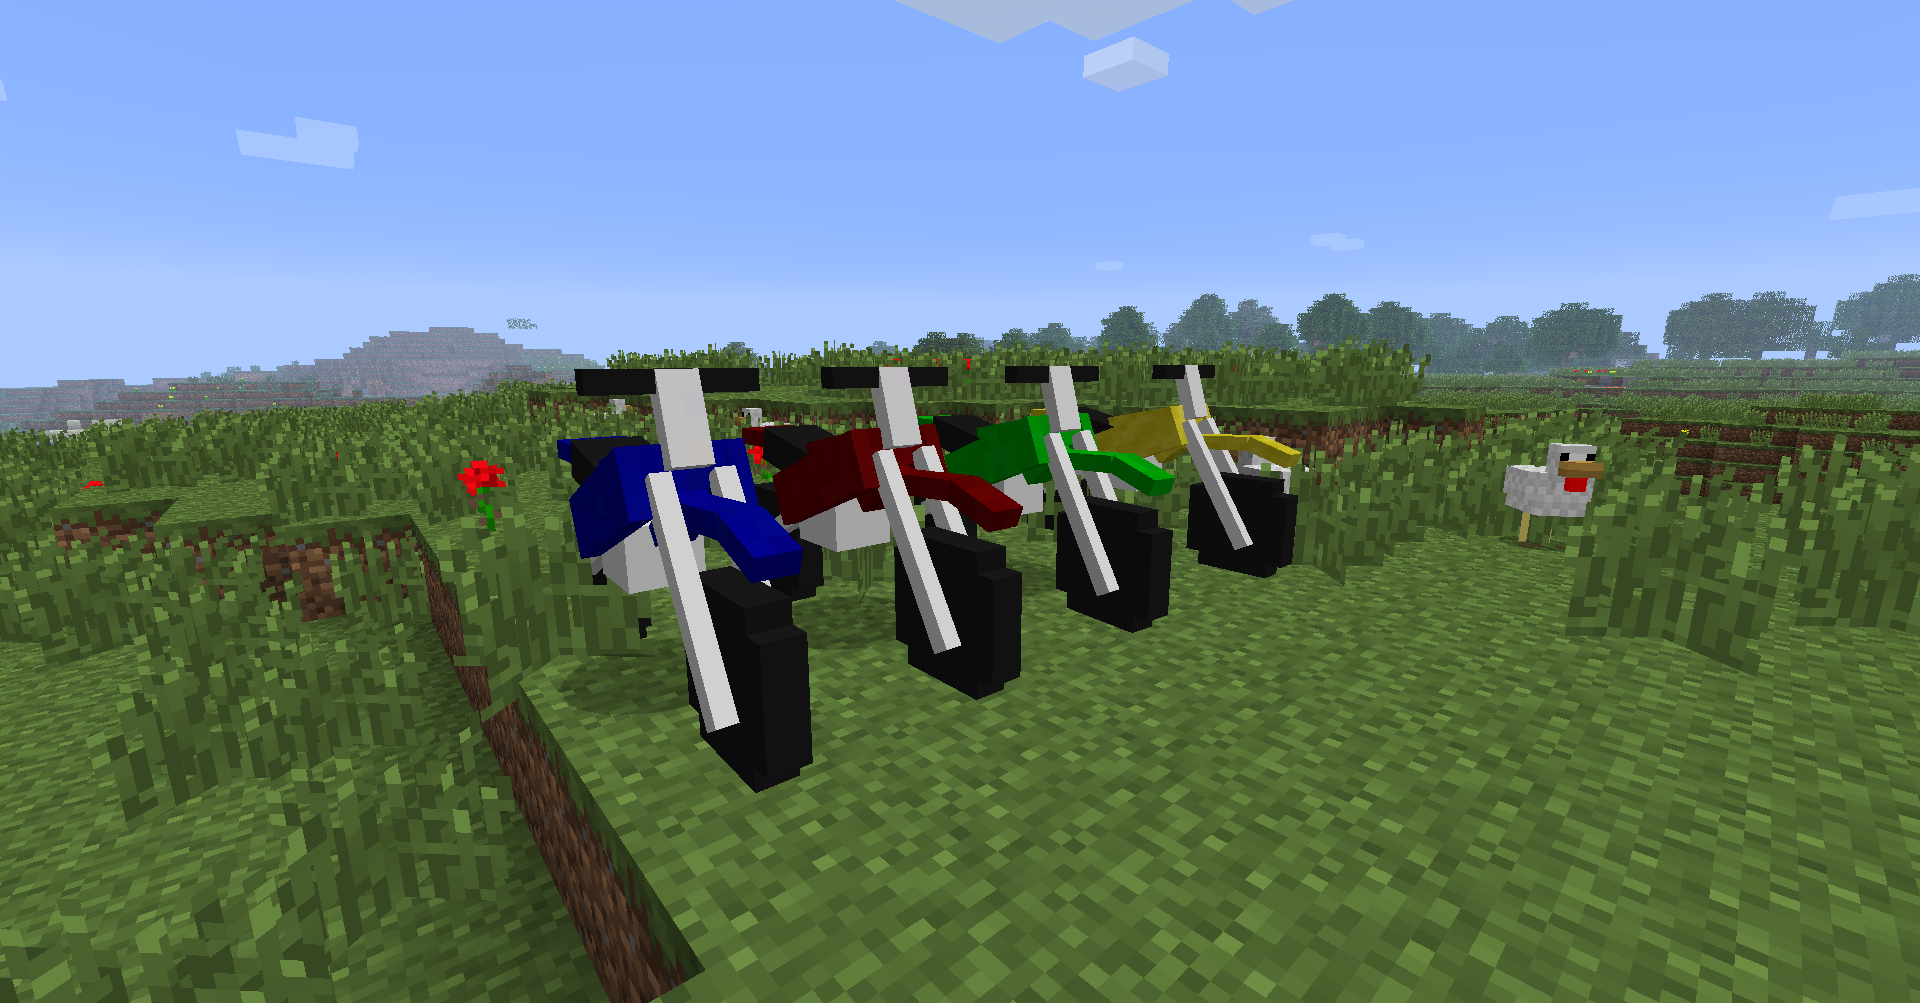 The Dirtbike Mod For Minecraft 1 17 1 16 5 1 15 2